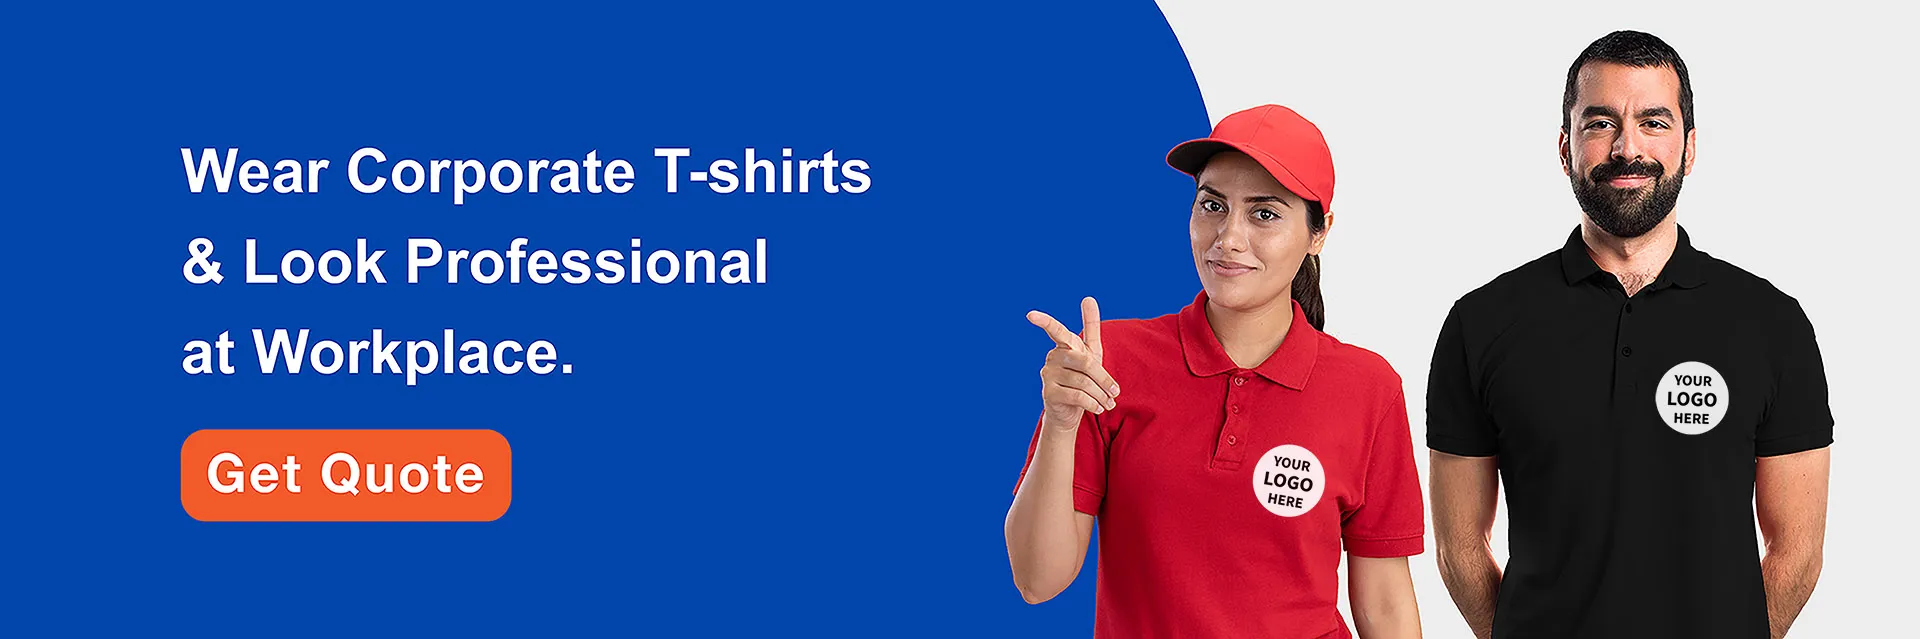 corporate t shirt manufacturers in mumbai uniforms for hotels industrial and company staff uniforms